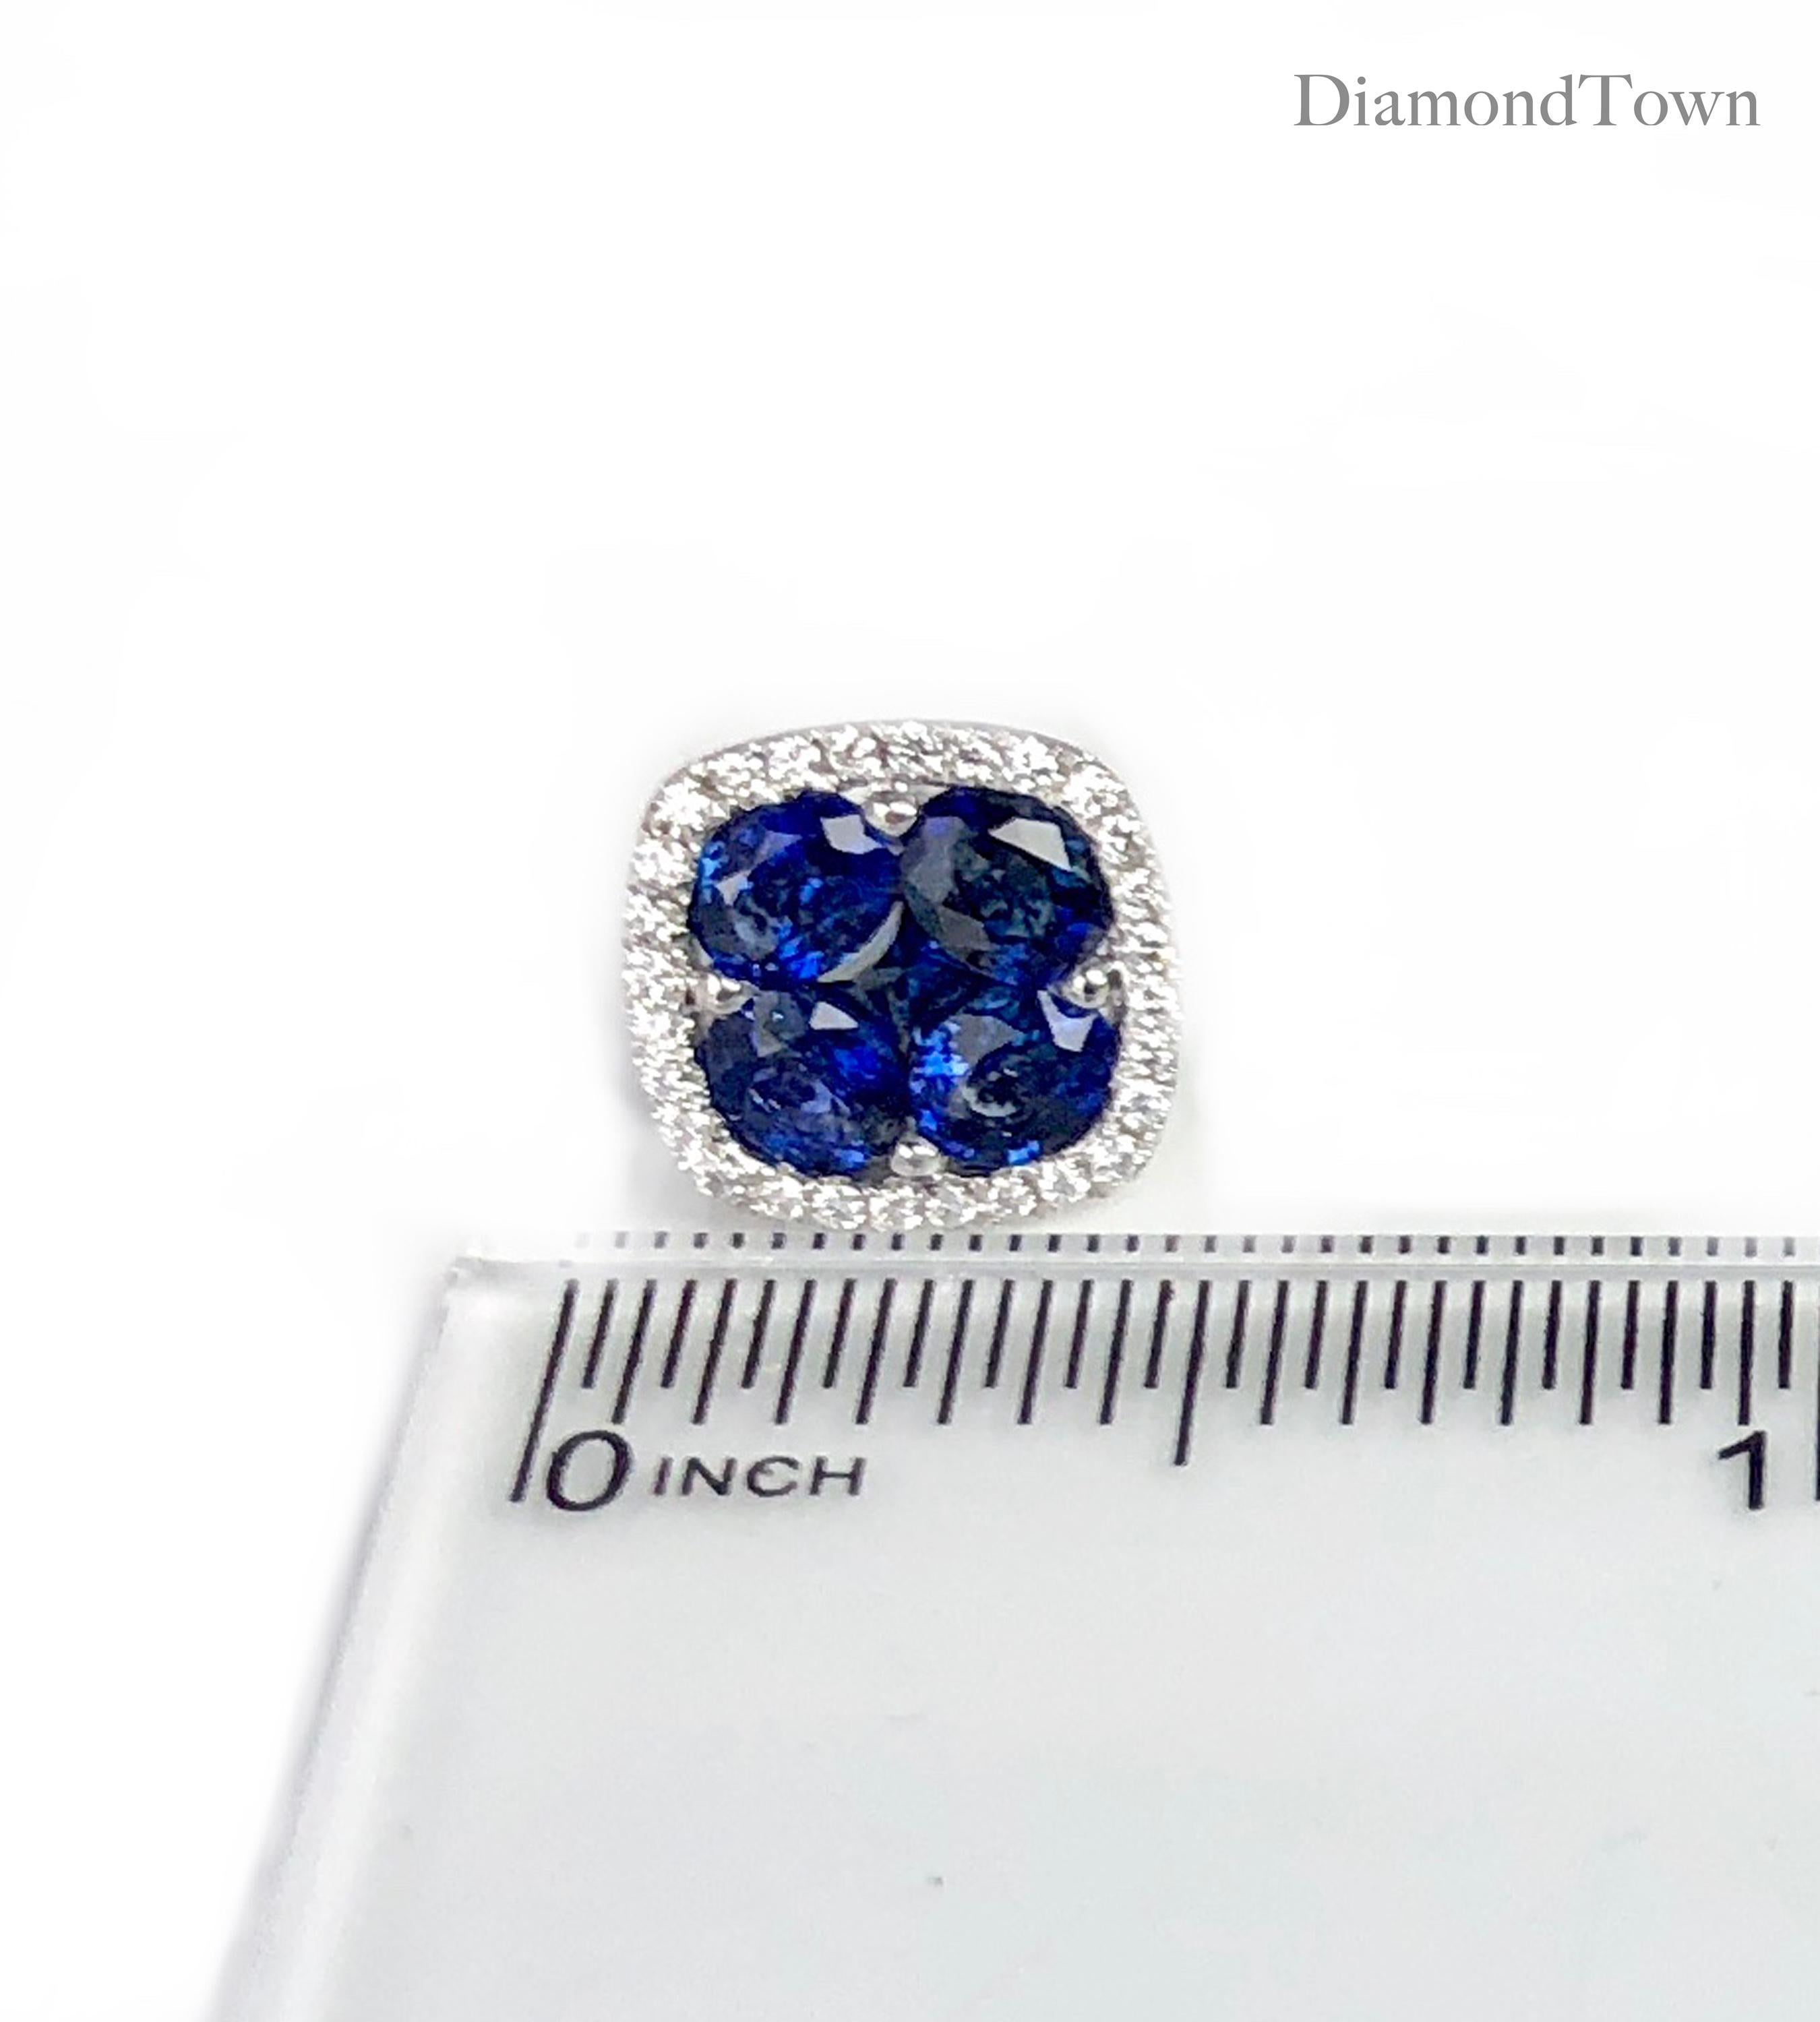 These stud earrings feature a cluster center of blue sapphires (five stones per earring, total weight 2.65 carats) surrounded by a halo of round white diamonds (total diamond weight 0.26 carats), set in 18k white gold.

A matching pendant is also